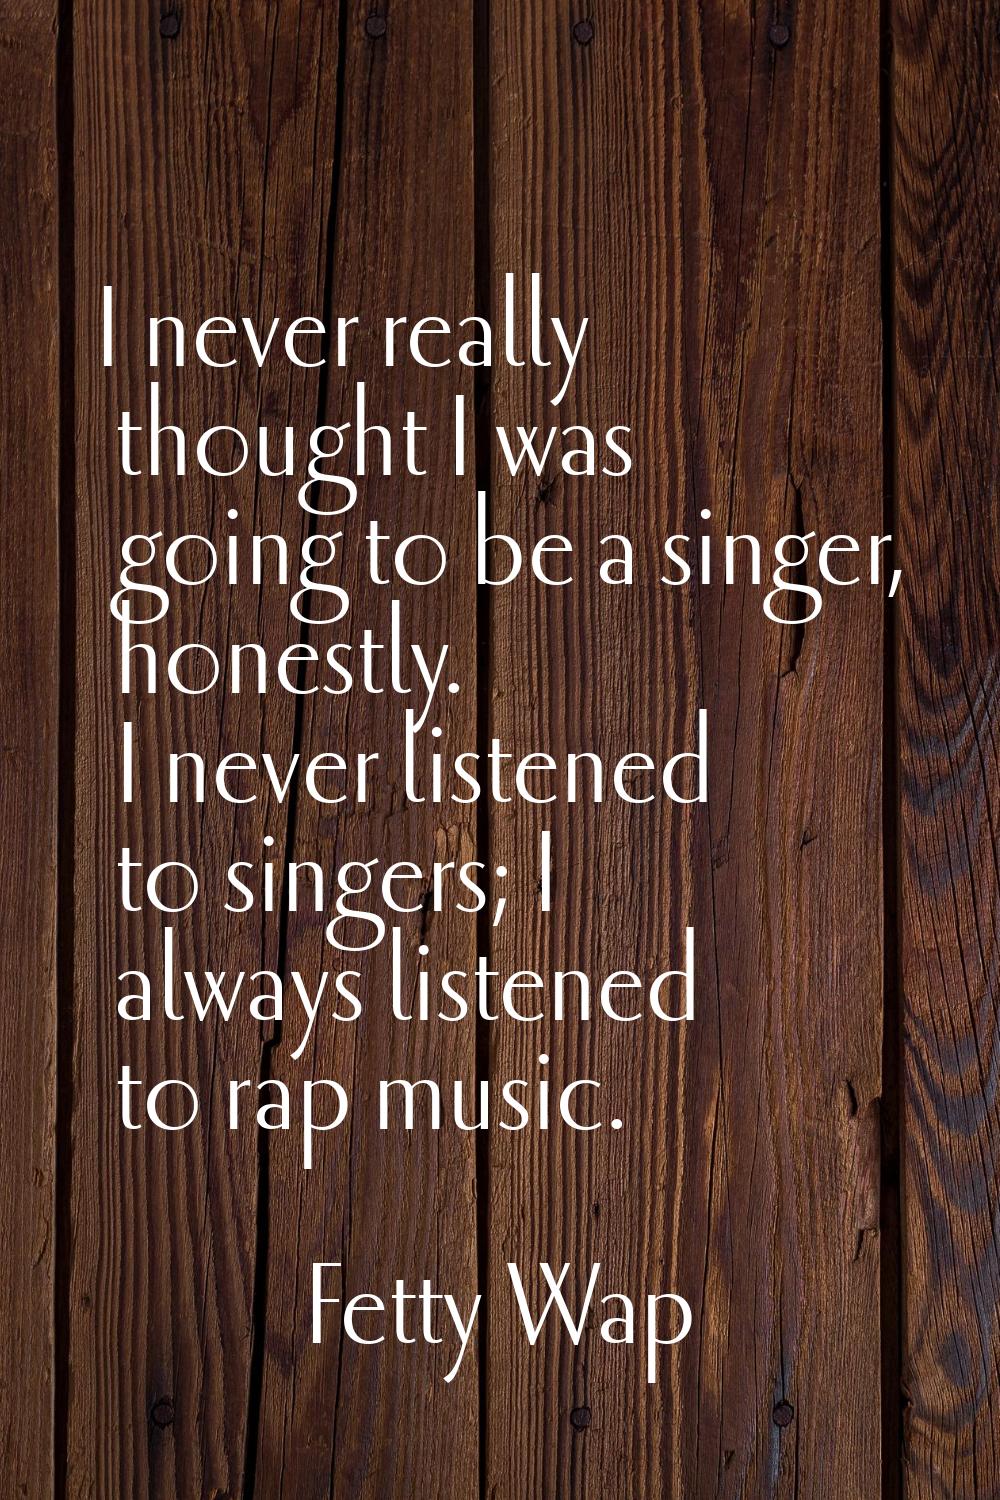 I never really thought I was going to be a singer, honestly. I never listened to singers; I always 